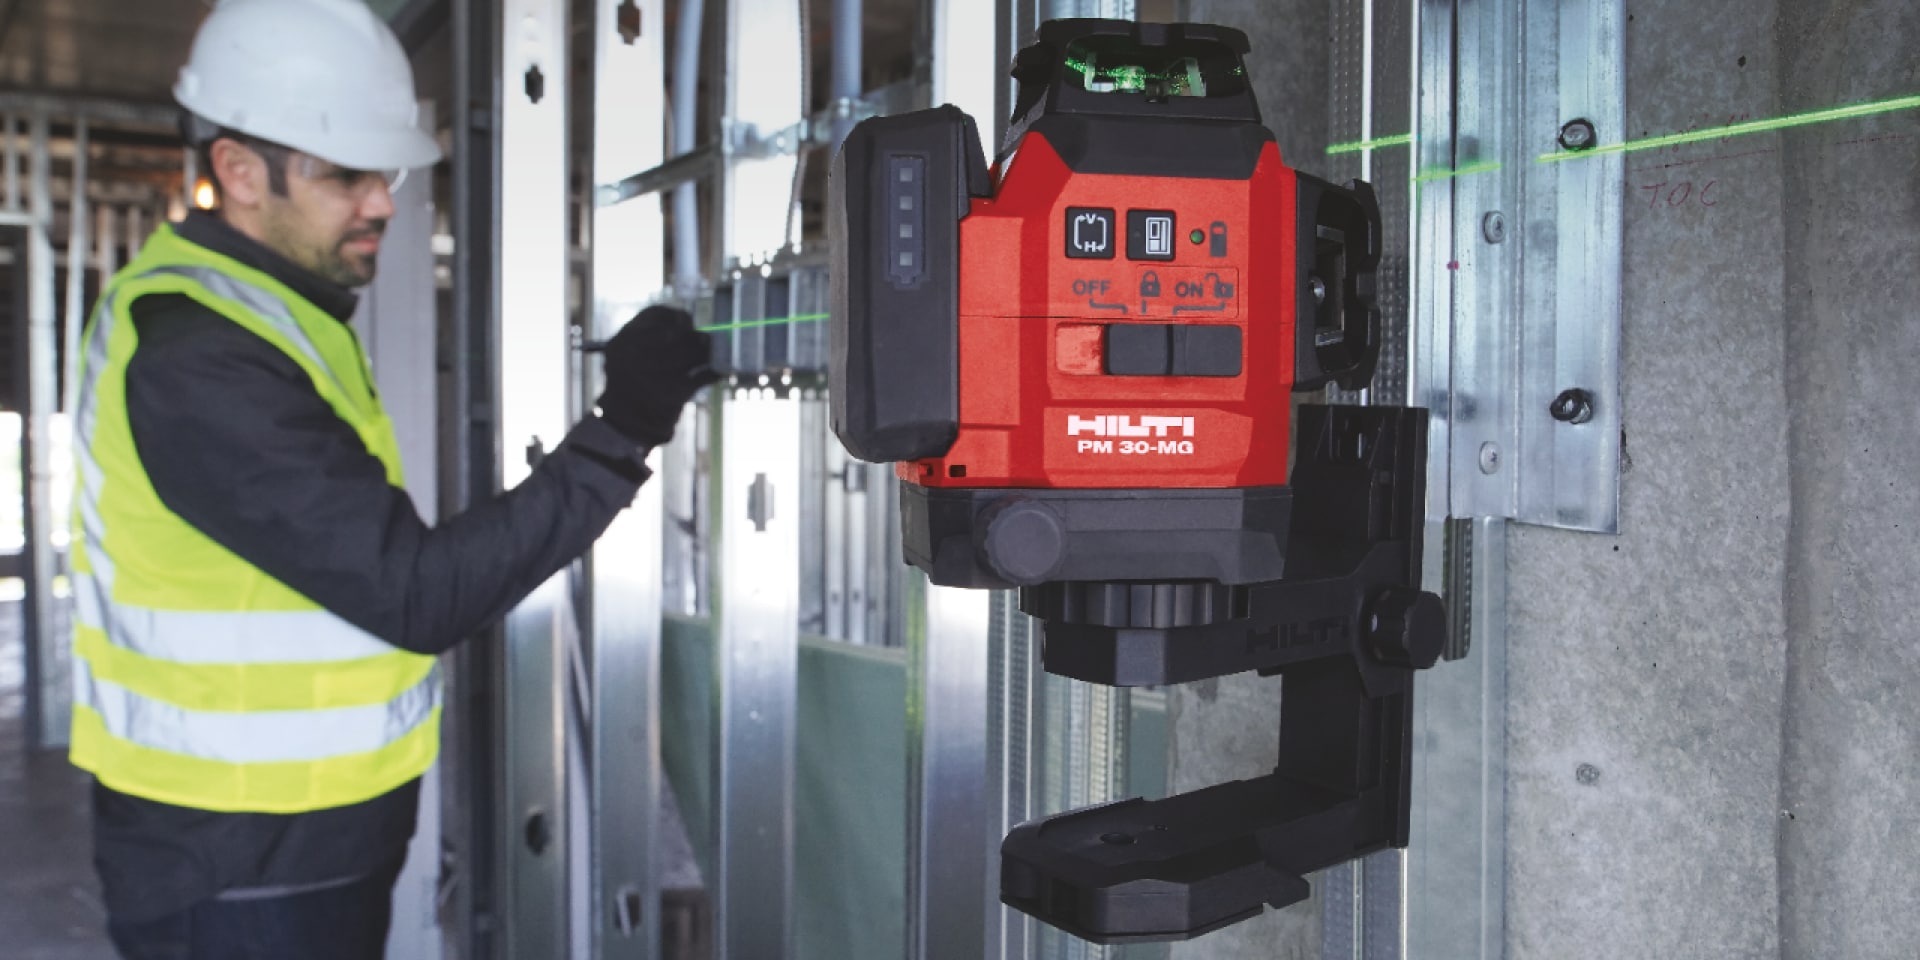 A worker operates a Hilti measuring tool